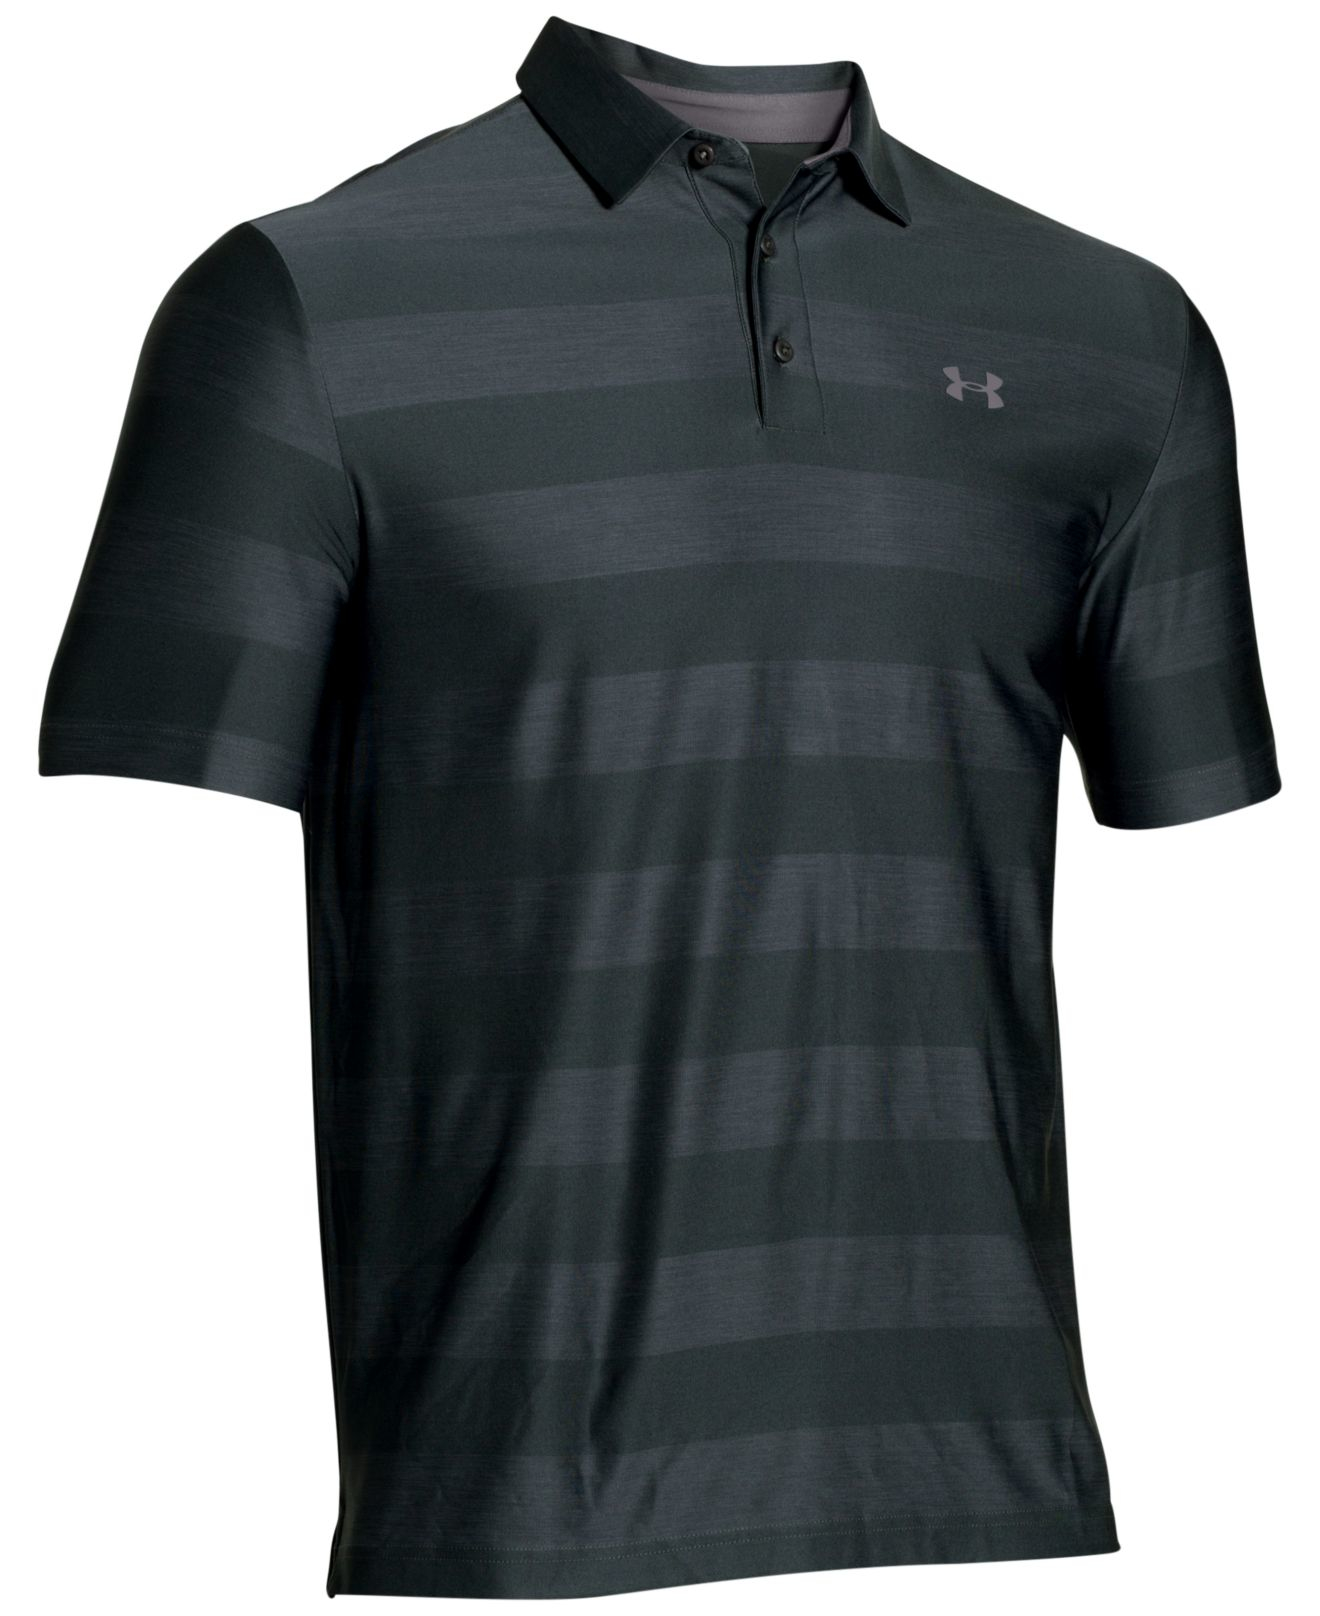 Under armour Men's Playoff Performance Striped Golf Polo in Black for